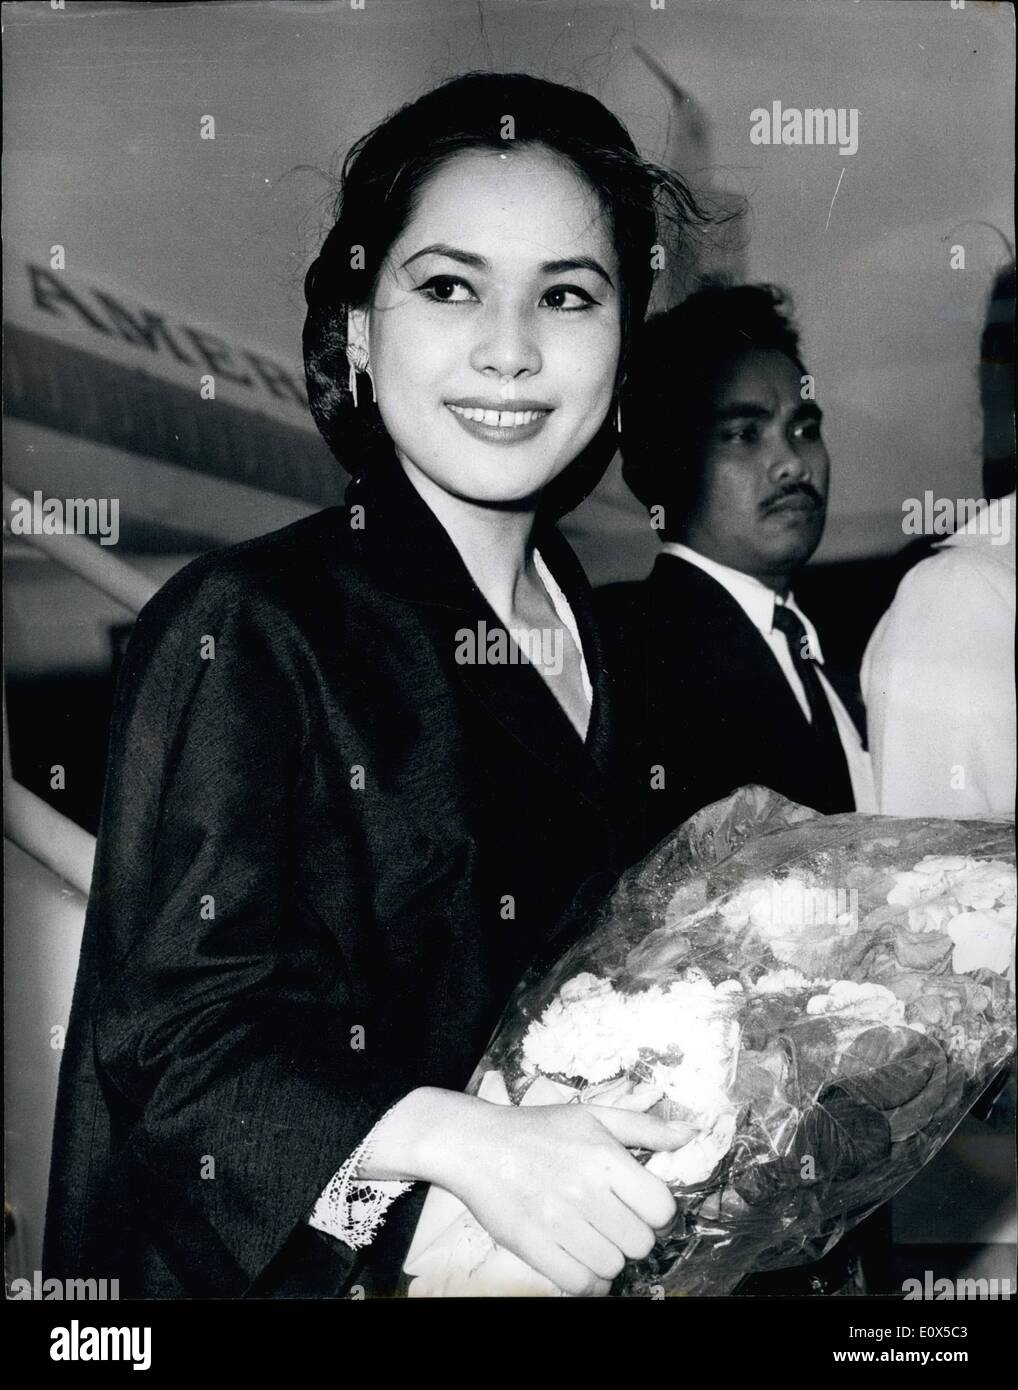 Jun. 06, 1965 - President Sukarno's new wife visits London: Ratna Sari Dewi, 24, the beautiful Japanese wife of Dr. Sukarno, the Indonesian President, arrived by air to London airport yesterday on her first visit to London. Madame Sukarno, one of the President's three wives as a Moslem he is allowed four is here to attend the delayed wedding party of her friend, the new Viscountess Newry, who married the Earl of Kilmorev's heir in Hamburg this month. Photo shows Madame Sukarno pictured on her arrival at London Airport yesterday. Stock Photo